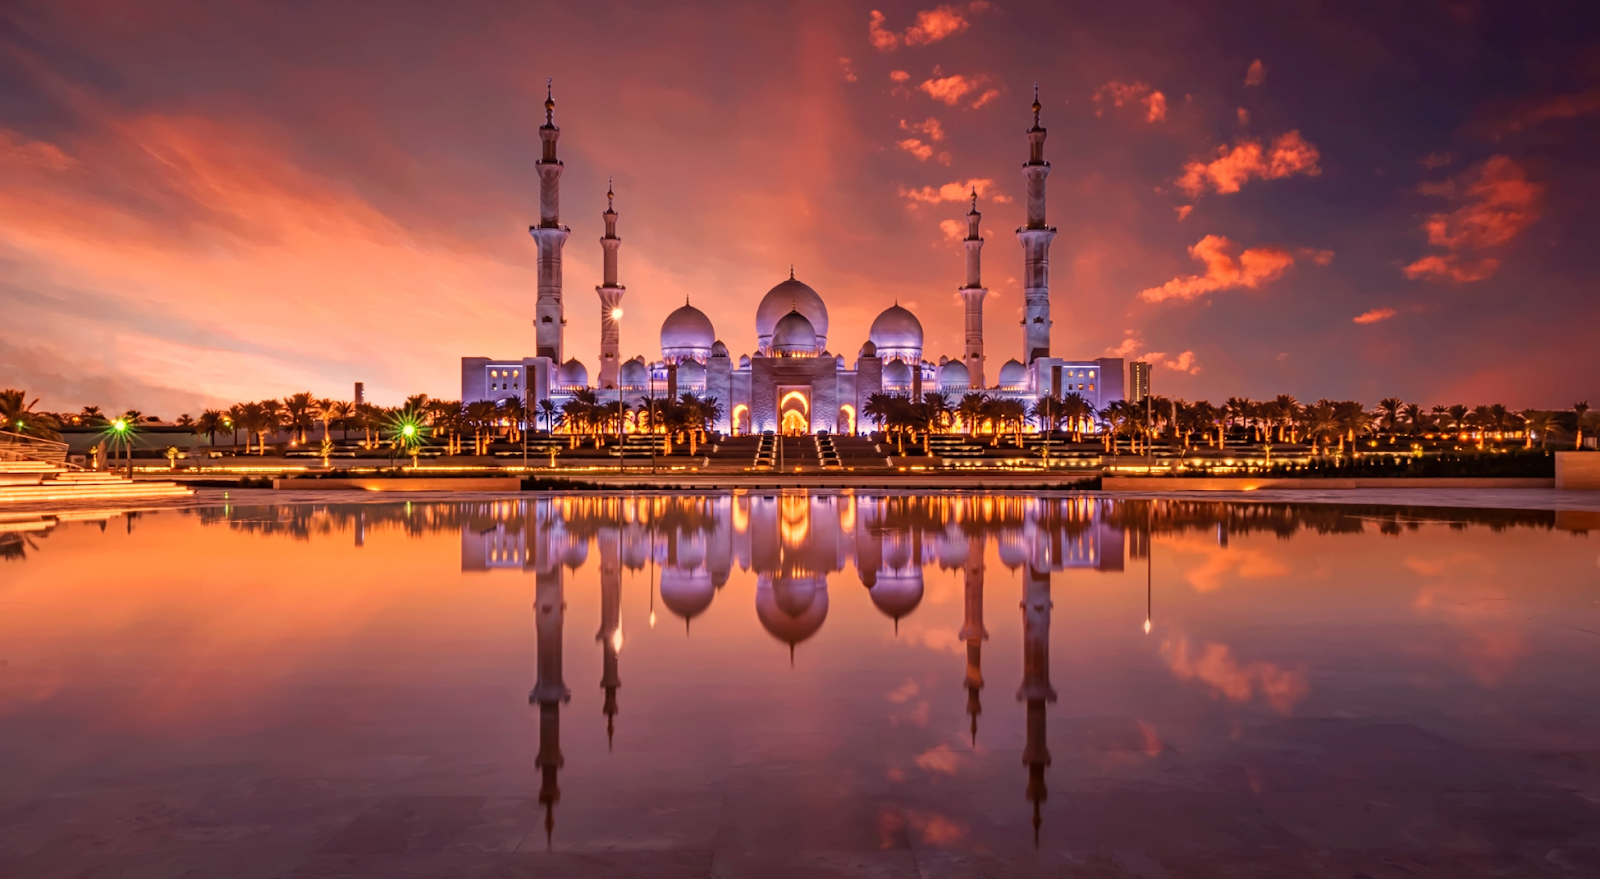 A to Z Bucket List - lake view with mirror effect of the Sheikh Zayed Grand Mosque
